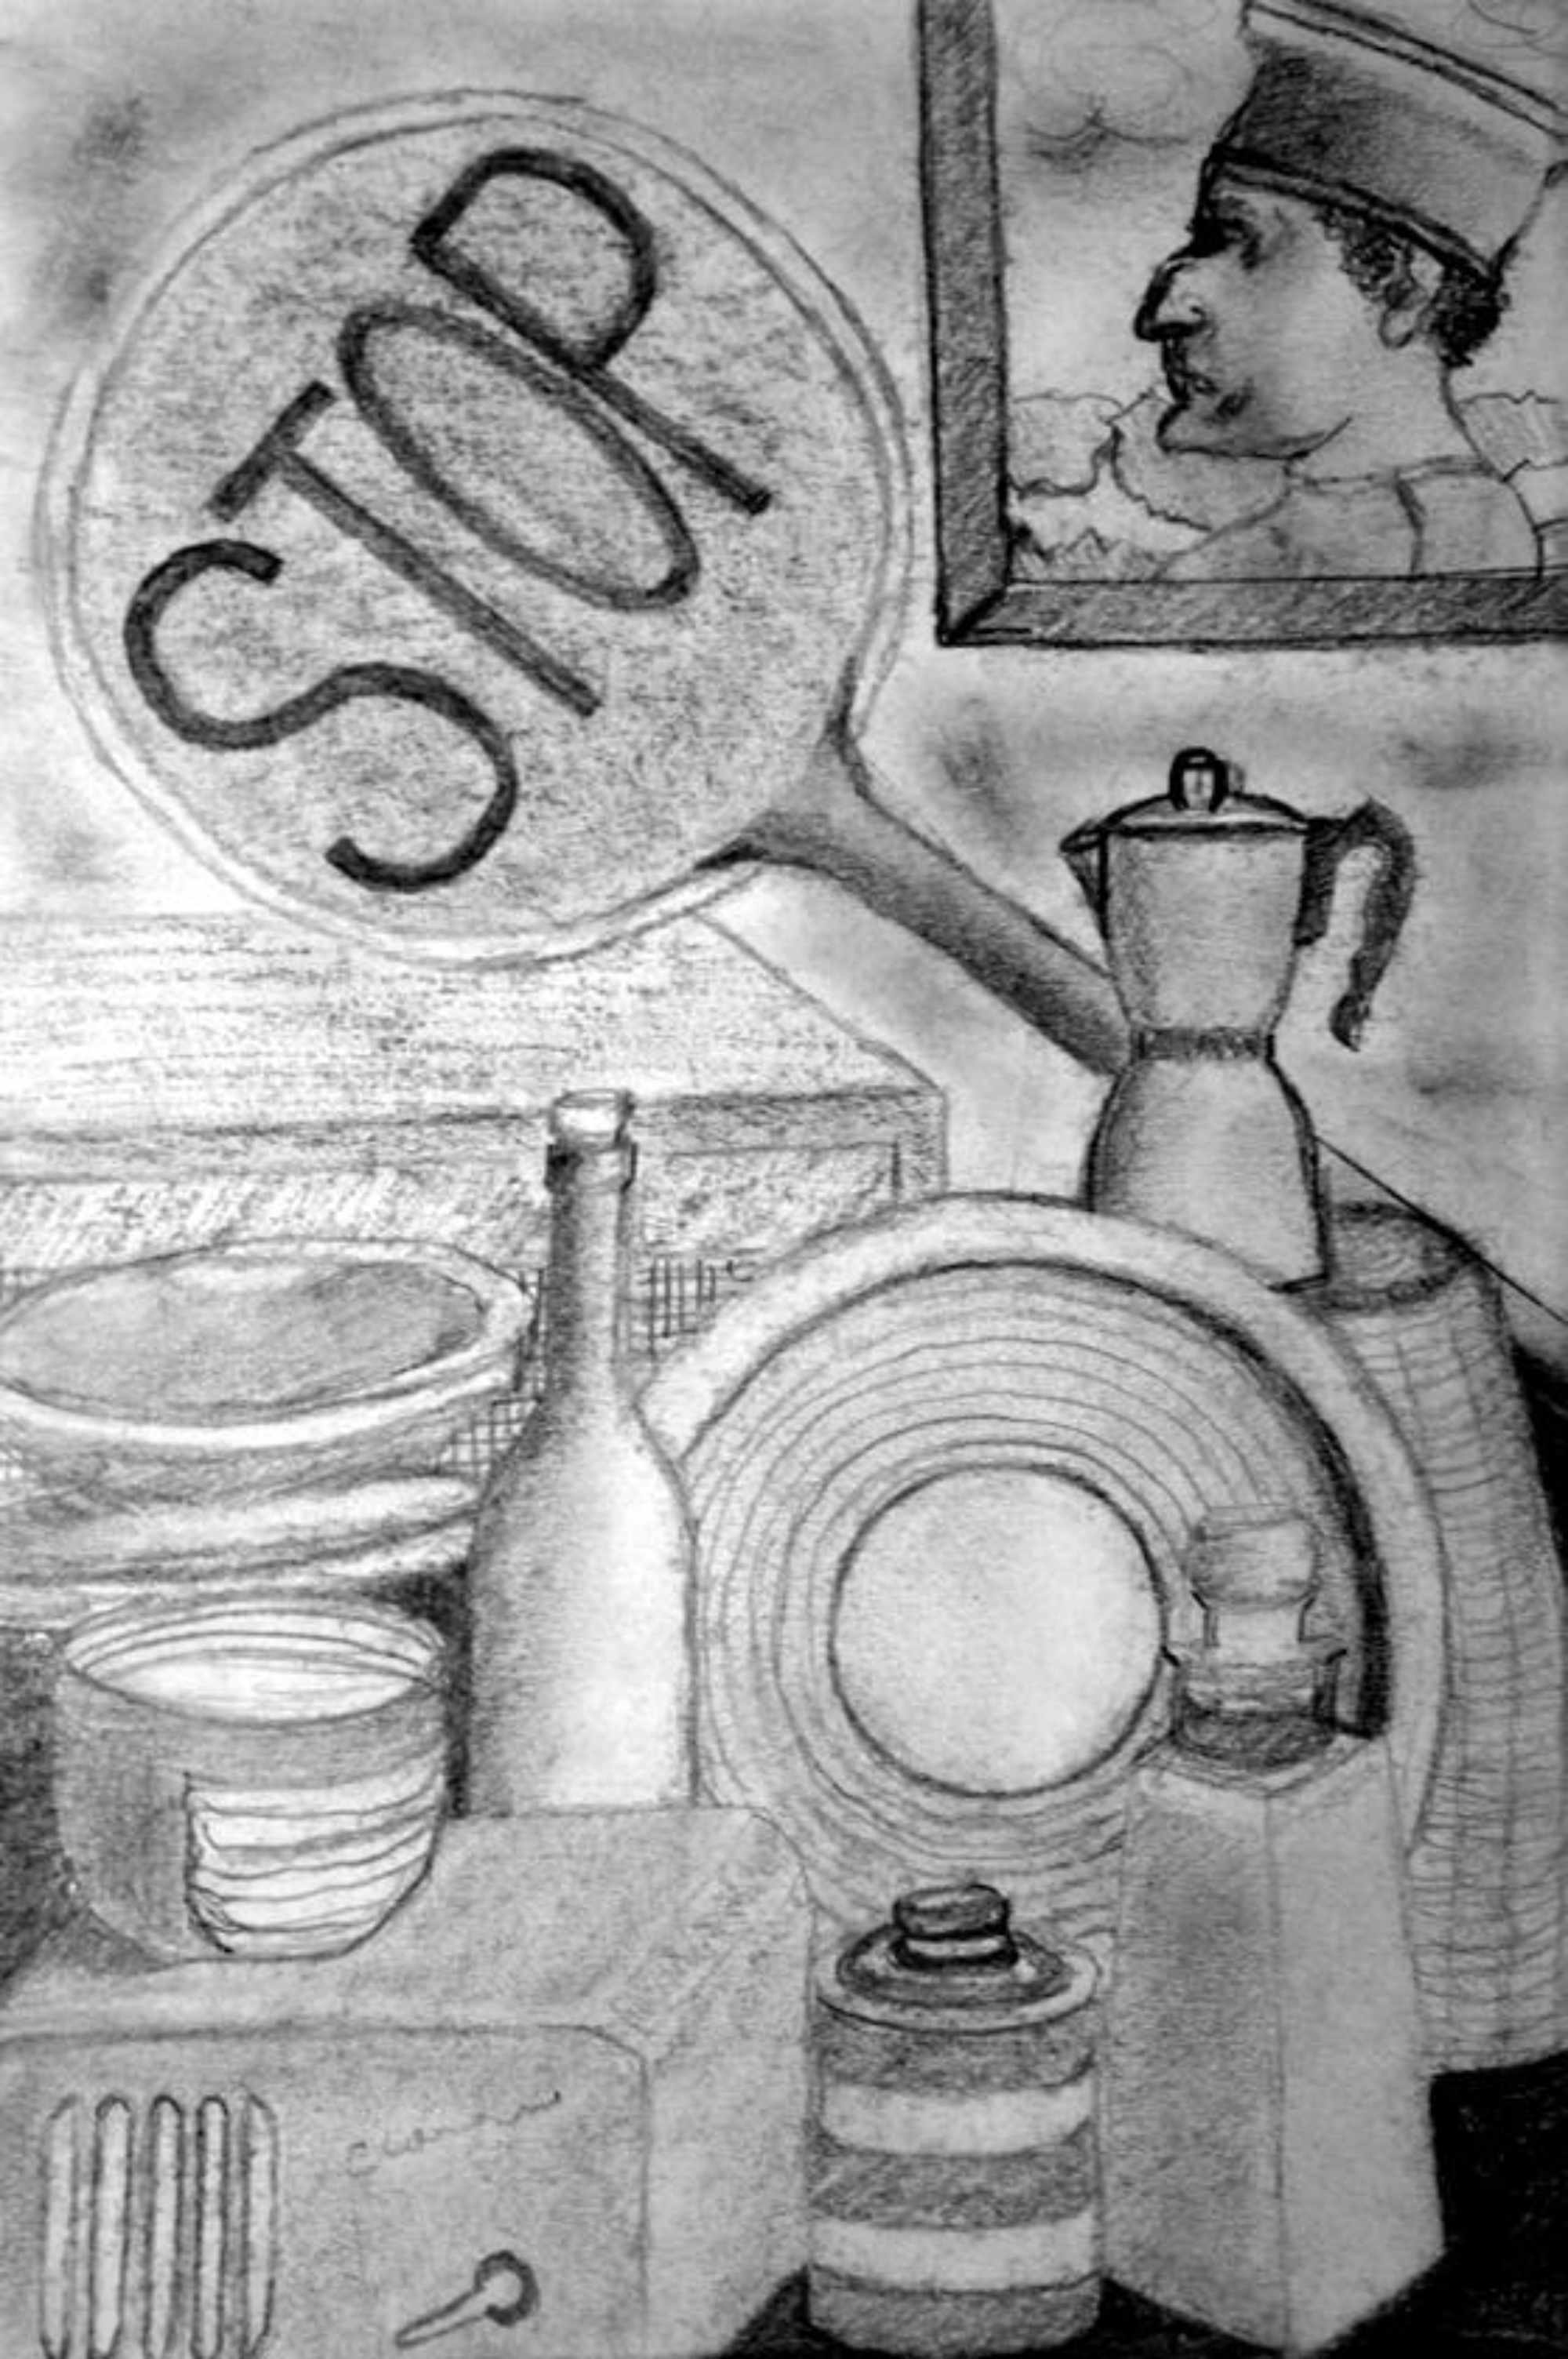 Still Life With Stop Sign - Graphite & Charcoal on Cartridge - 210 x 300mm